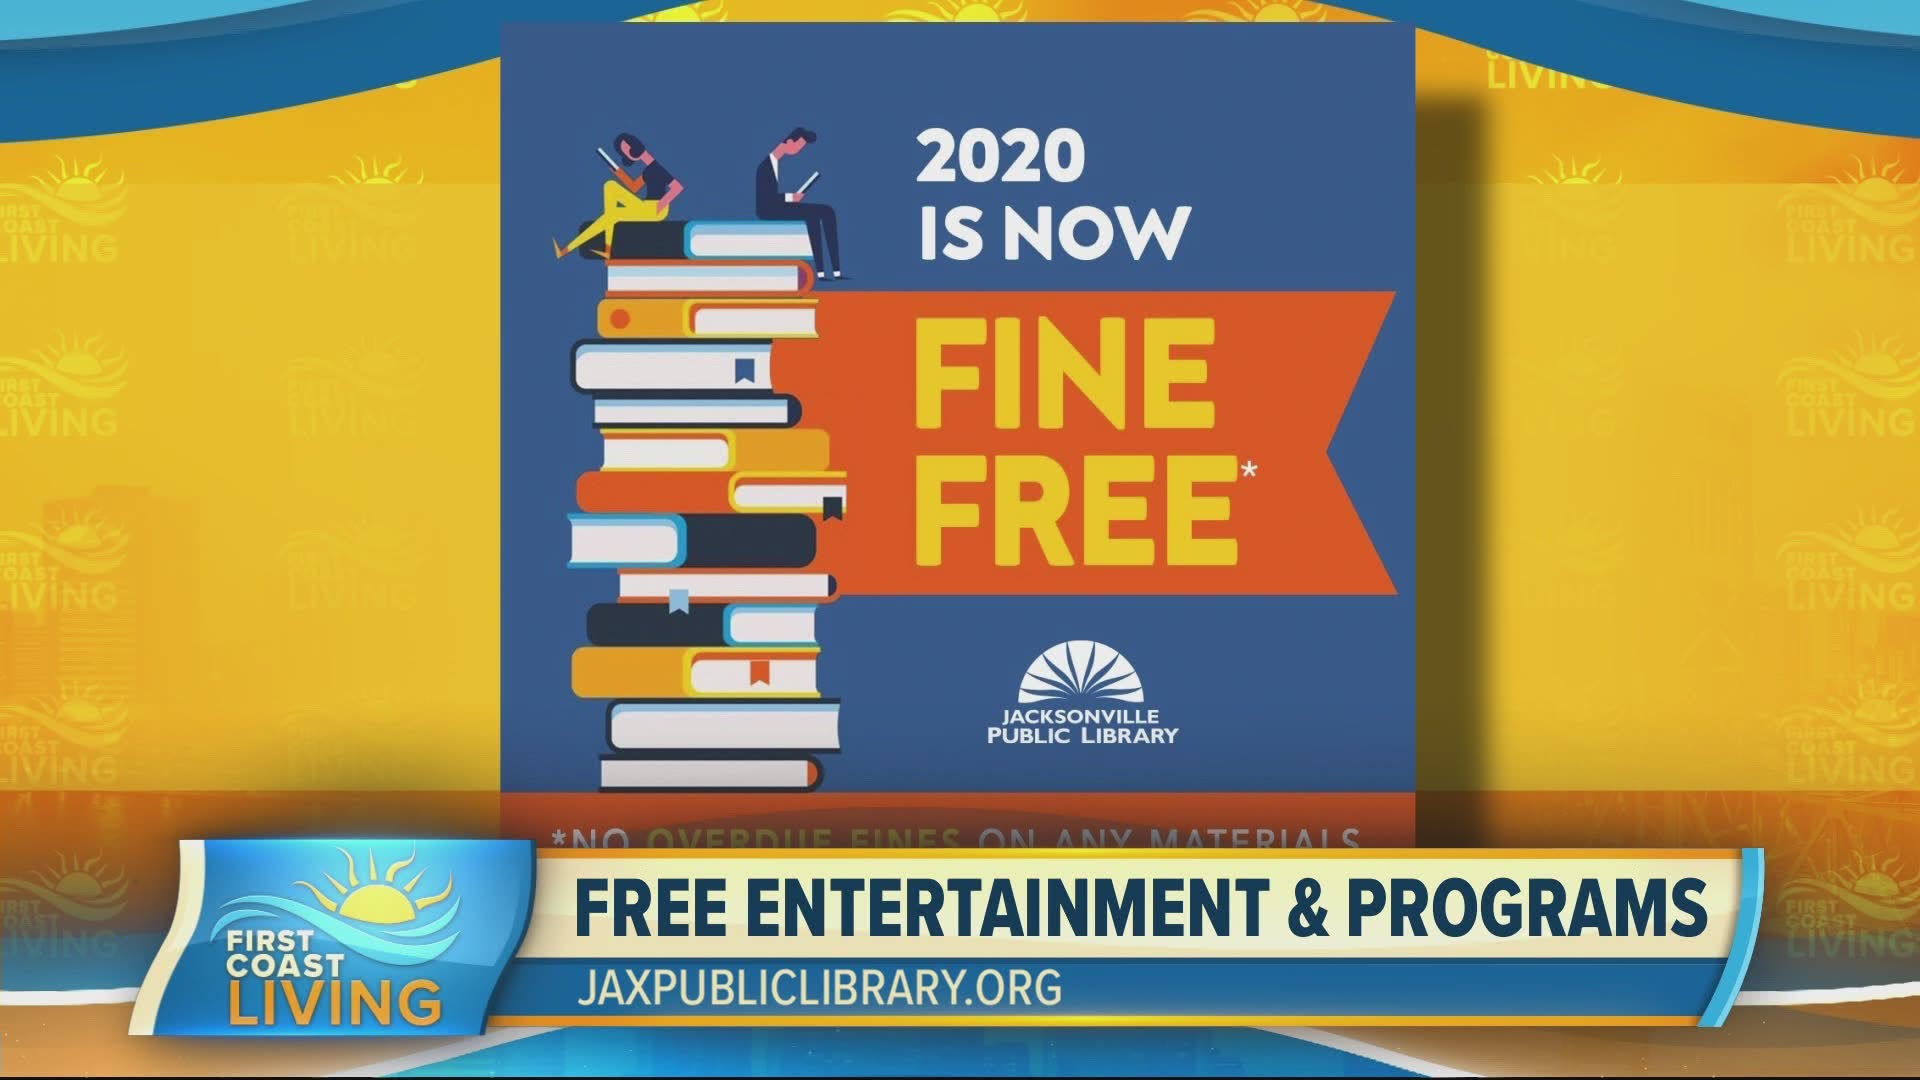 Did you know 2020 is now fine free for 2020 at the Jacksonville Library?